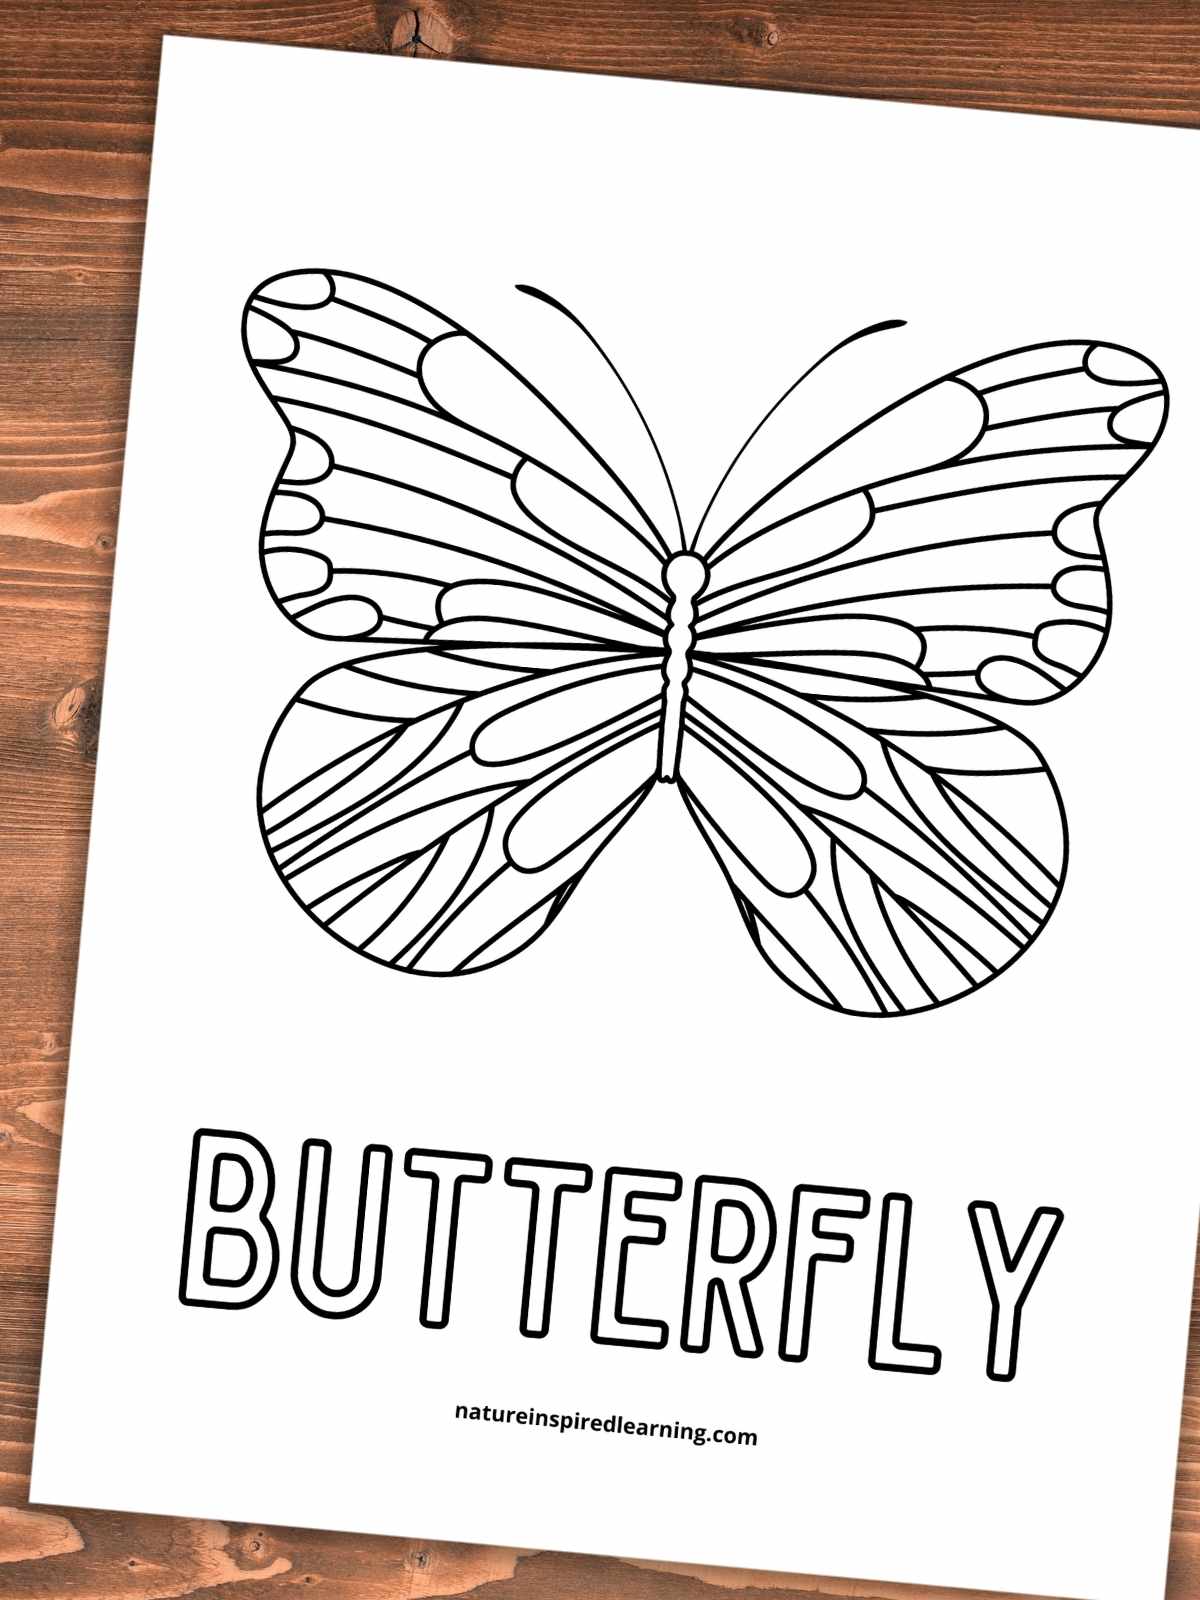 printable with a basic butterfly shape with designs and the word butterfly written below in all caps and bubble letters. Sheet on a wooden background